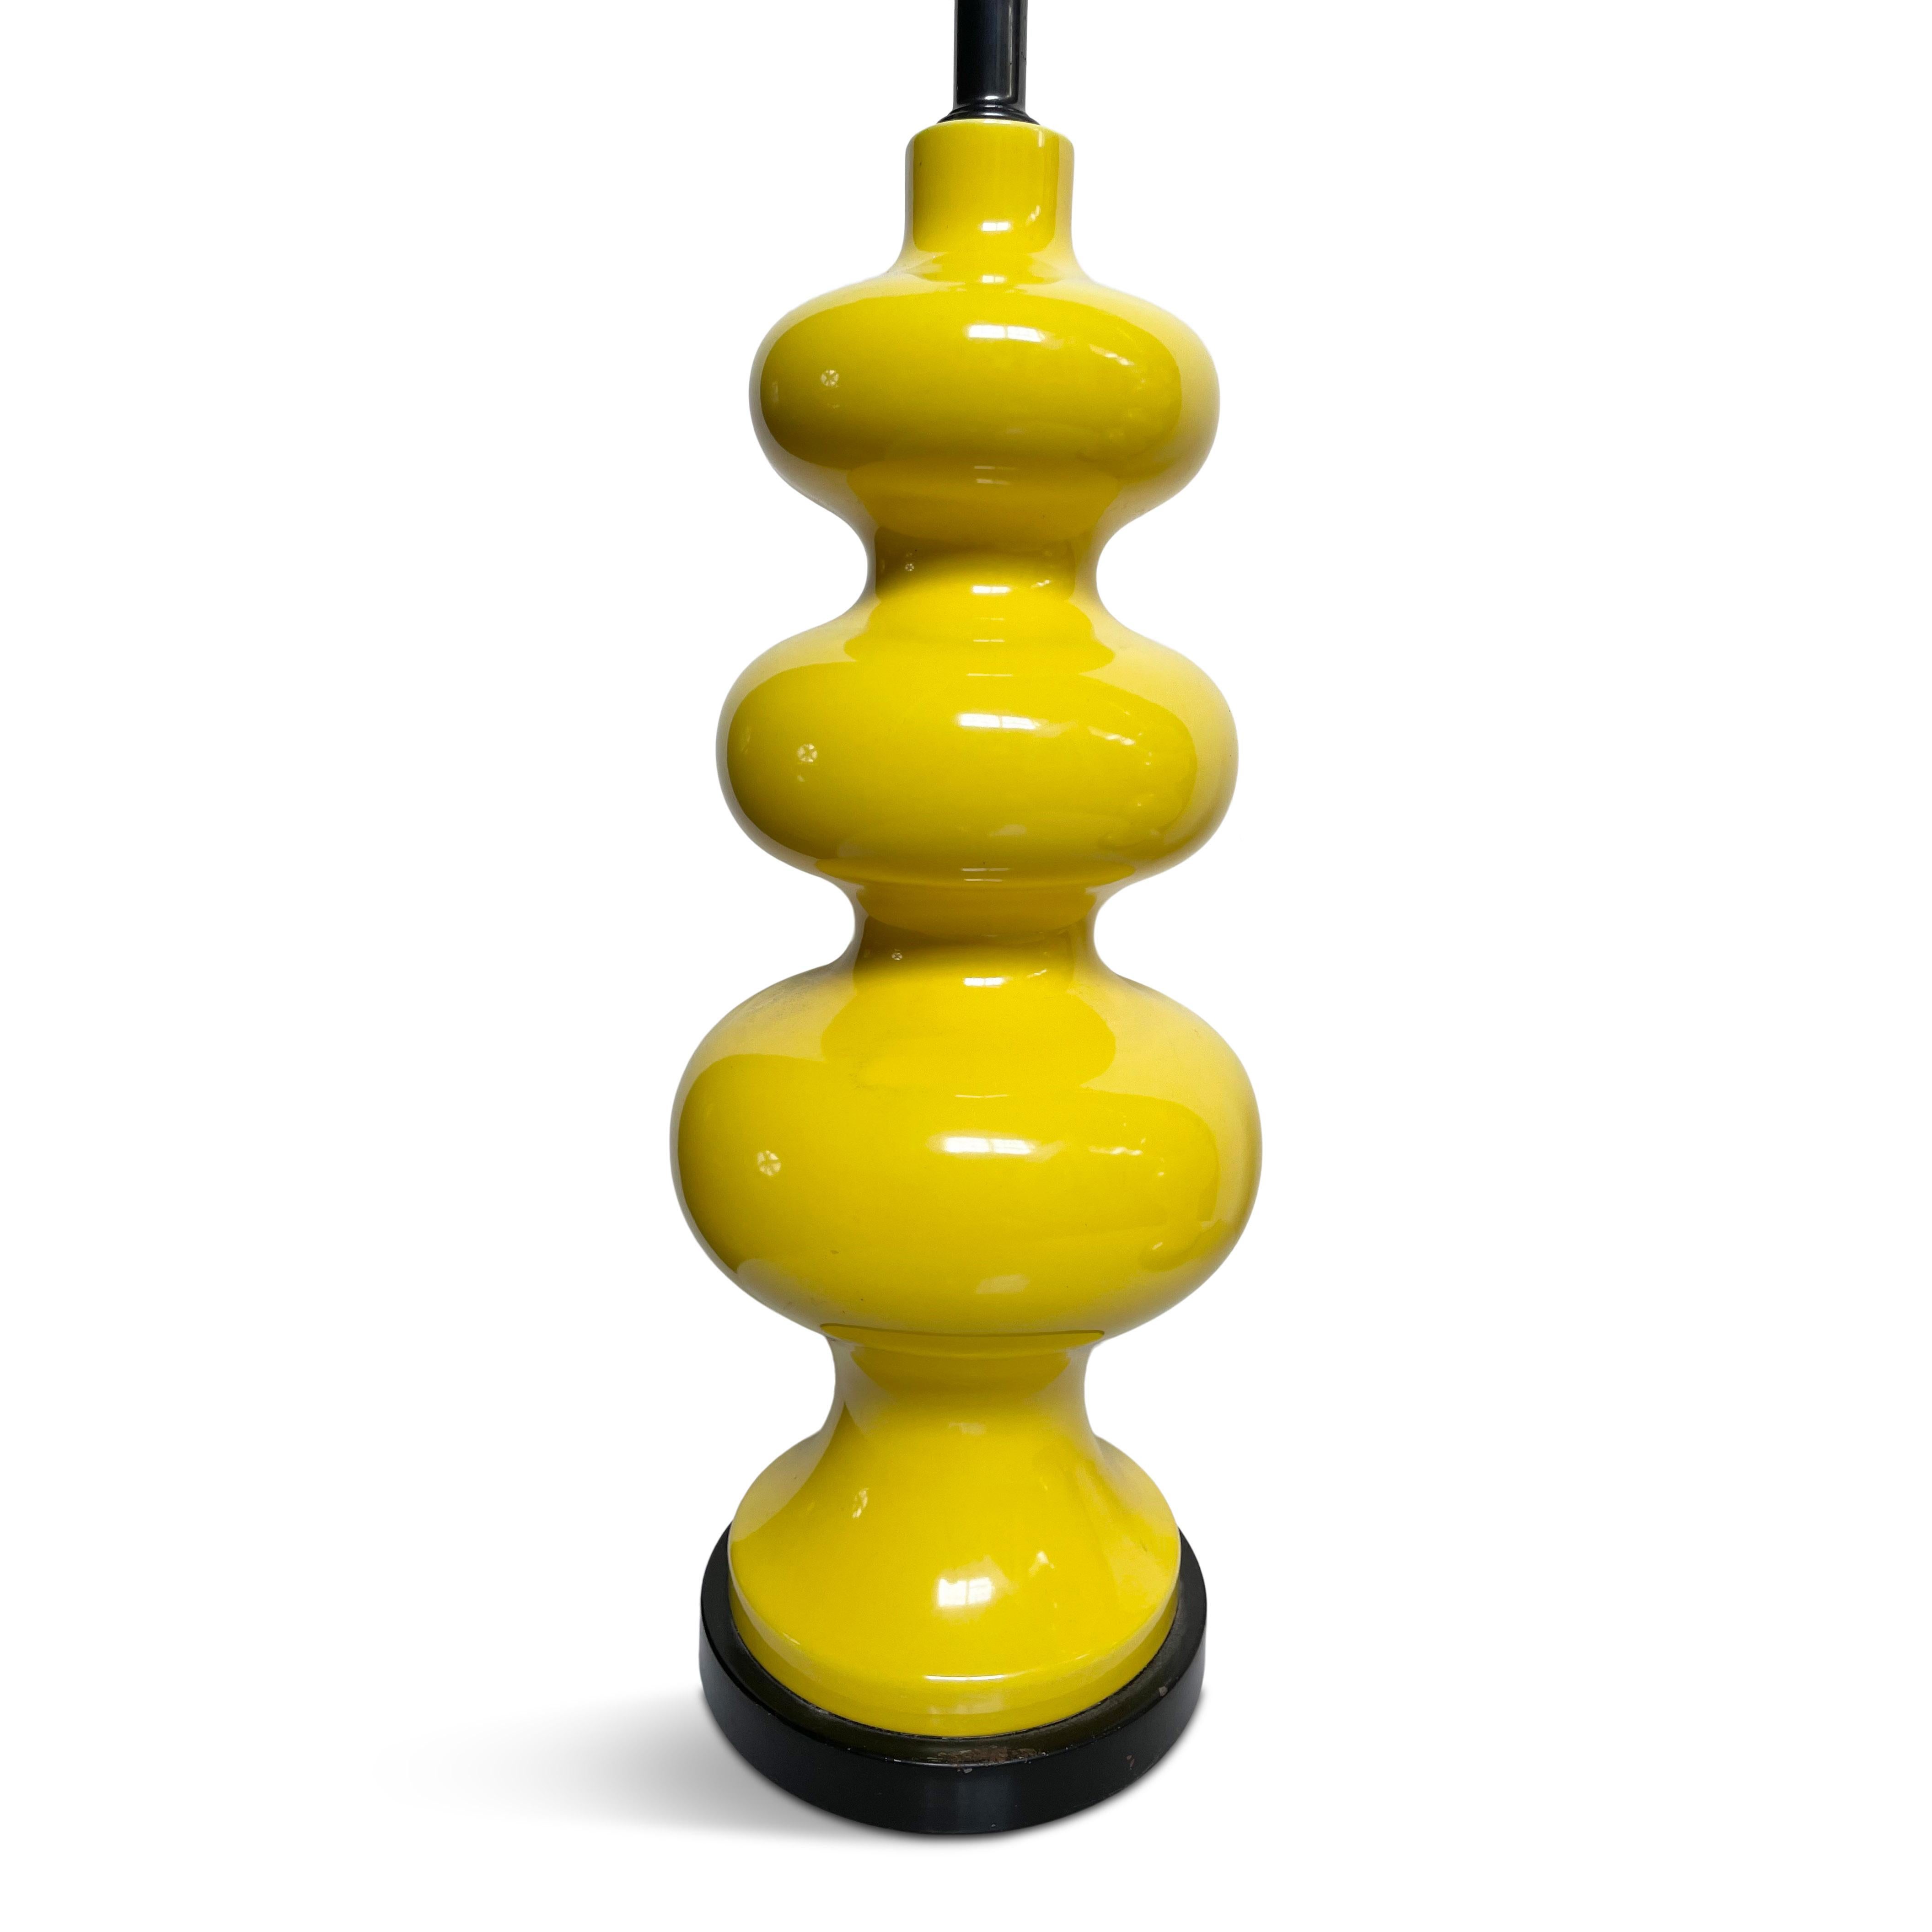 These wonderful lamps are a striking yellow and the most wonderful undulating shape. They will add a glorious touch to any room.